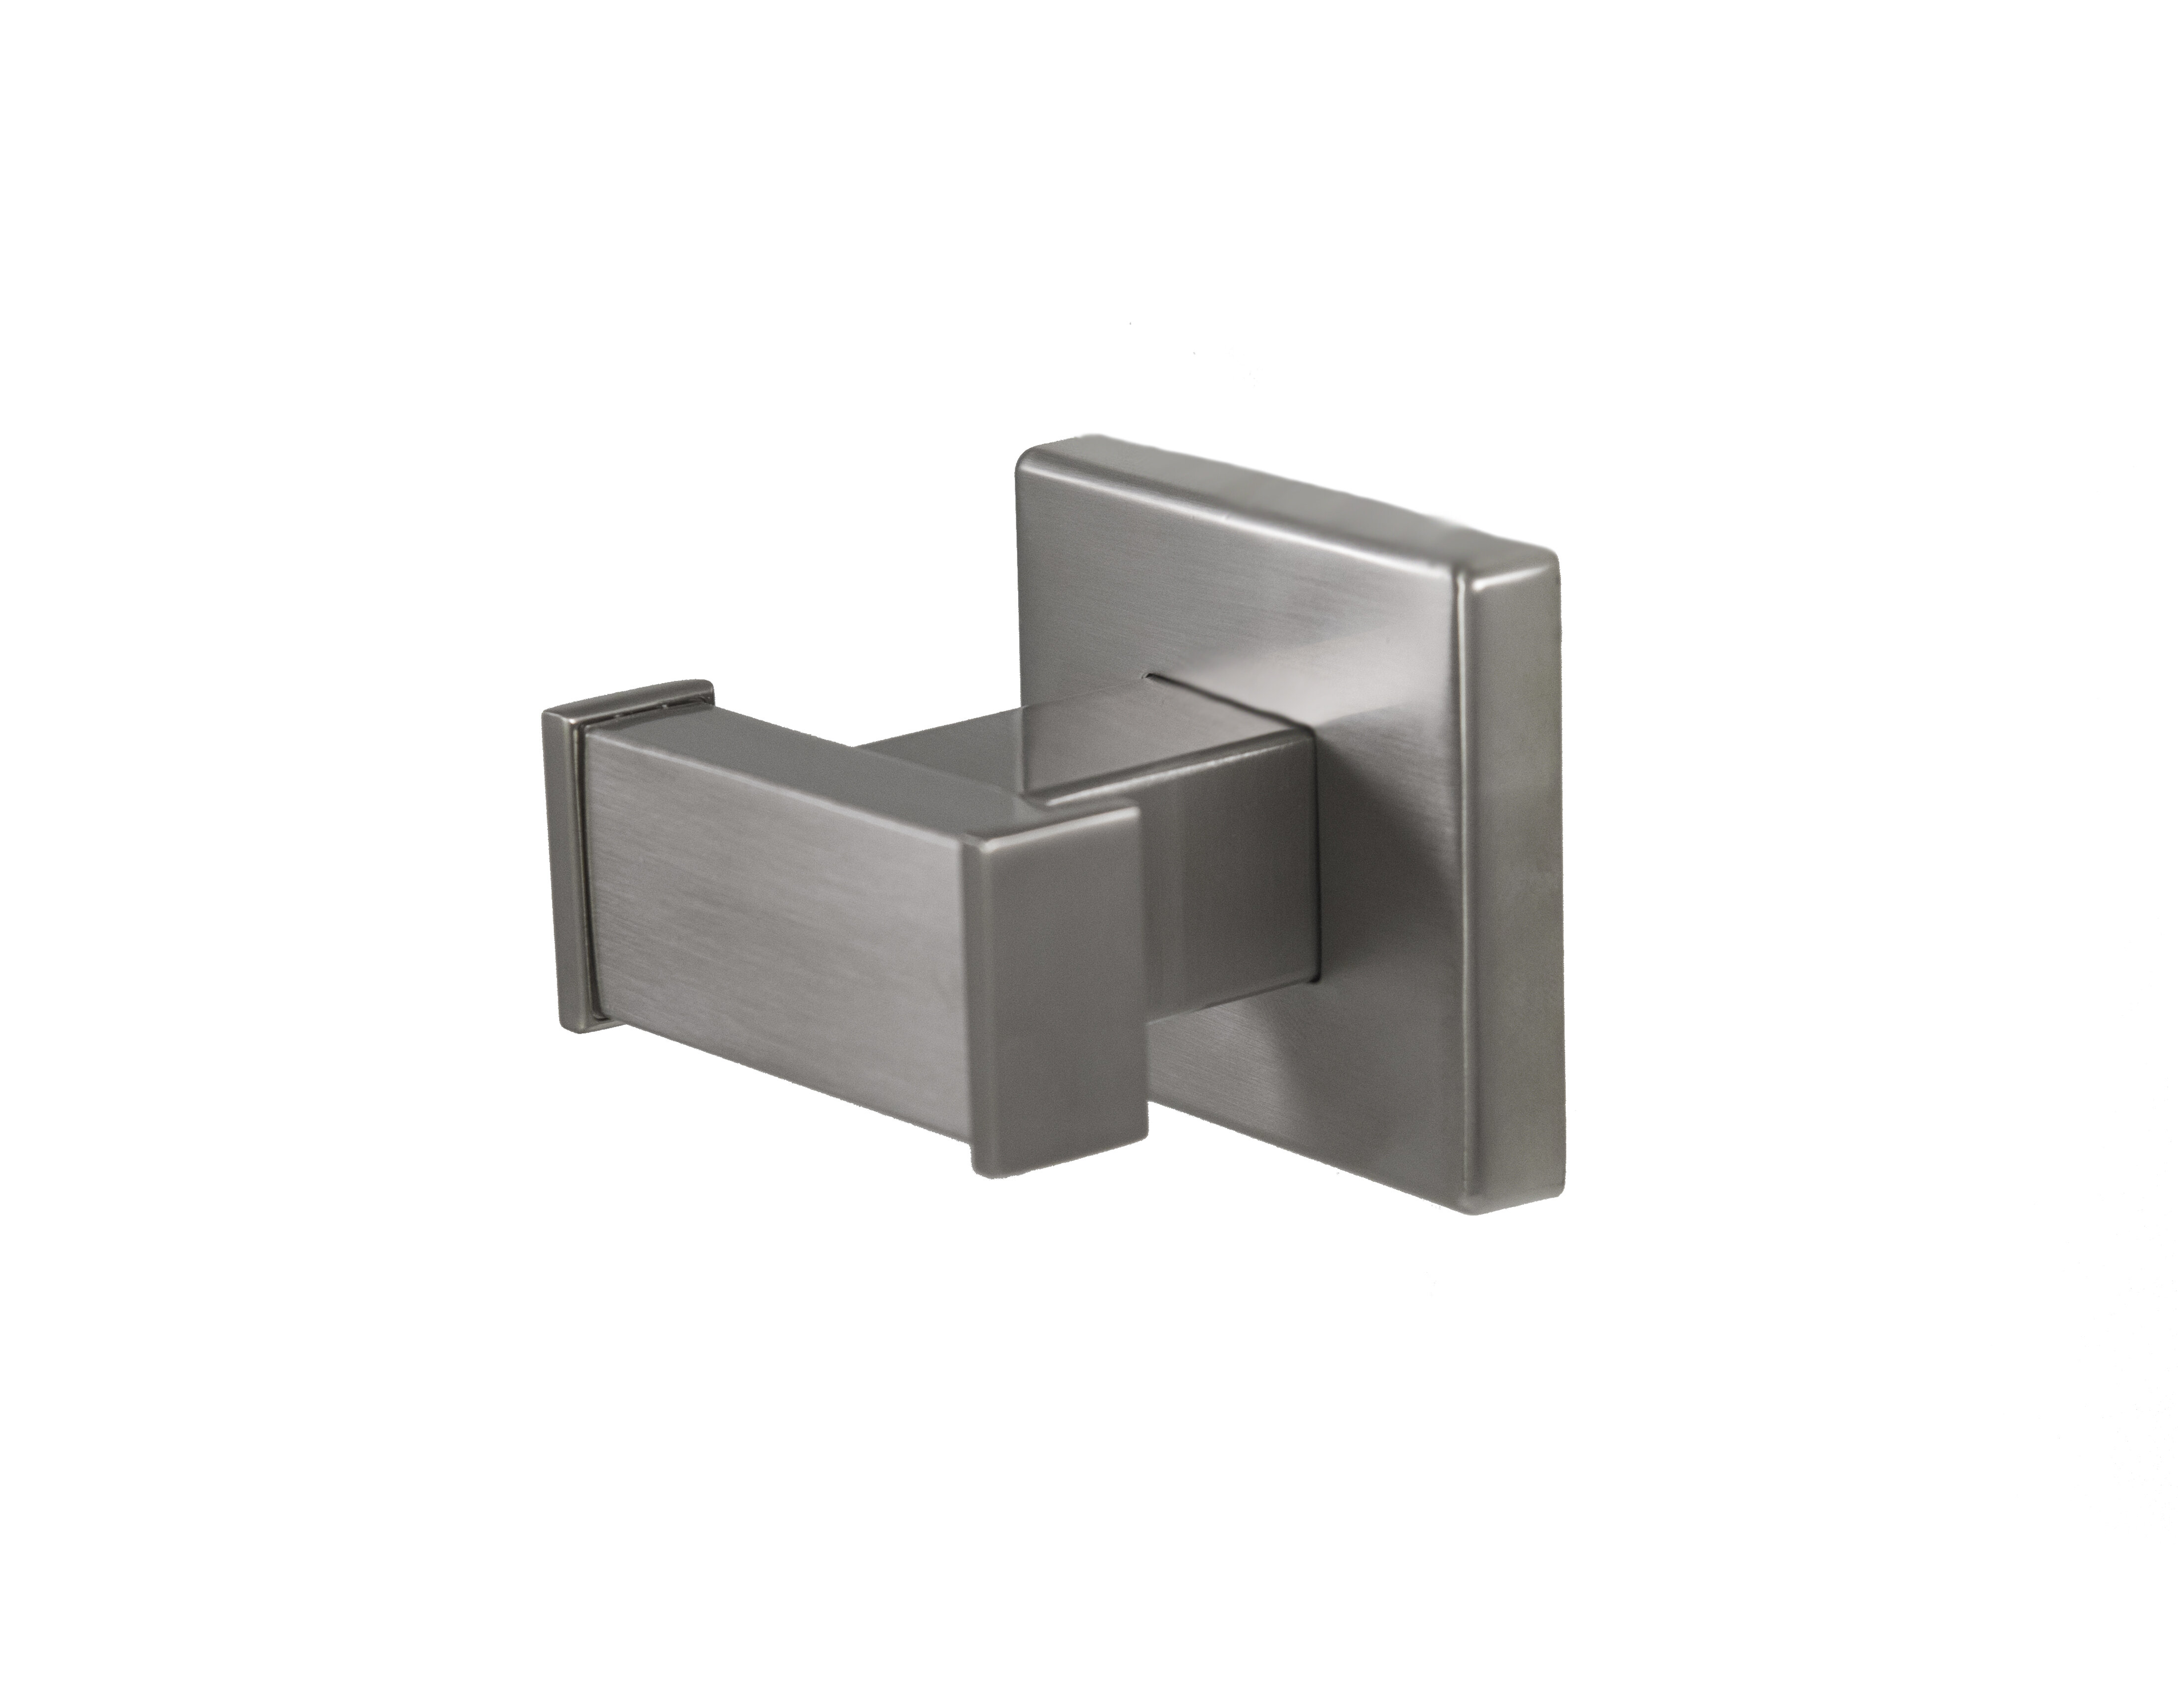 Preferred Bath Accessories 1000-BN-DH Primo Collection Double Robe Hook, Brushed Nickel